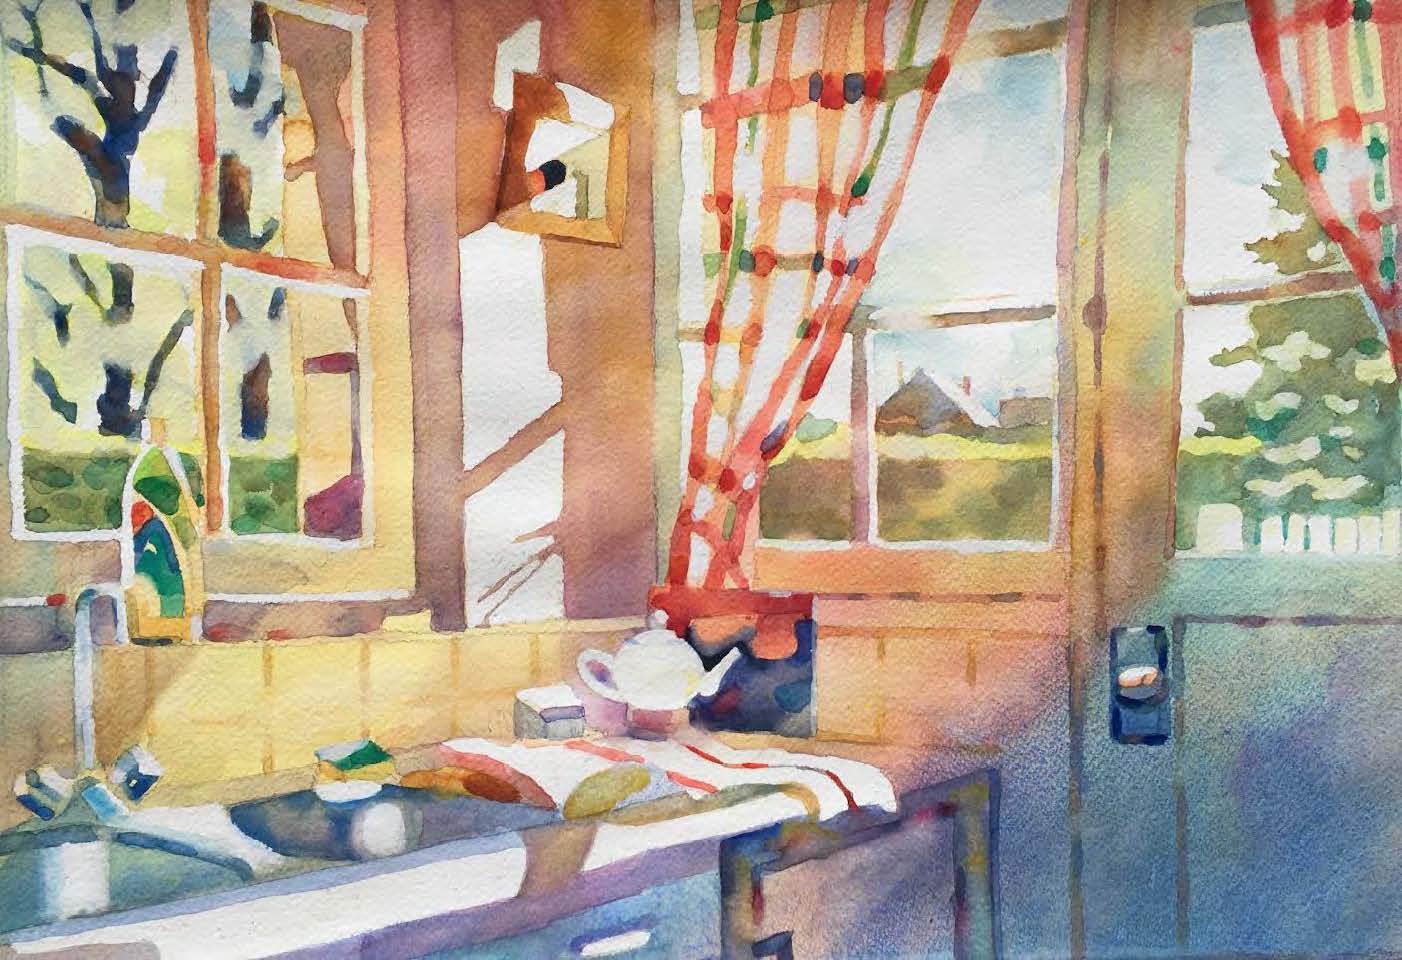 “Little French Kitchen”
Christine Heyse, AWS, NWS, BWS
First Place Award
Watercolor
Image 15” x 22”
Framed 24” x 30”
$750